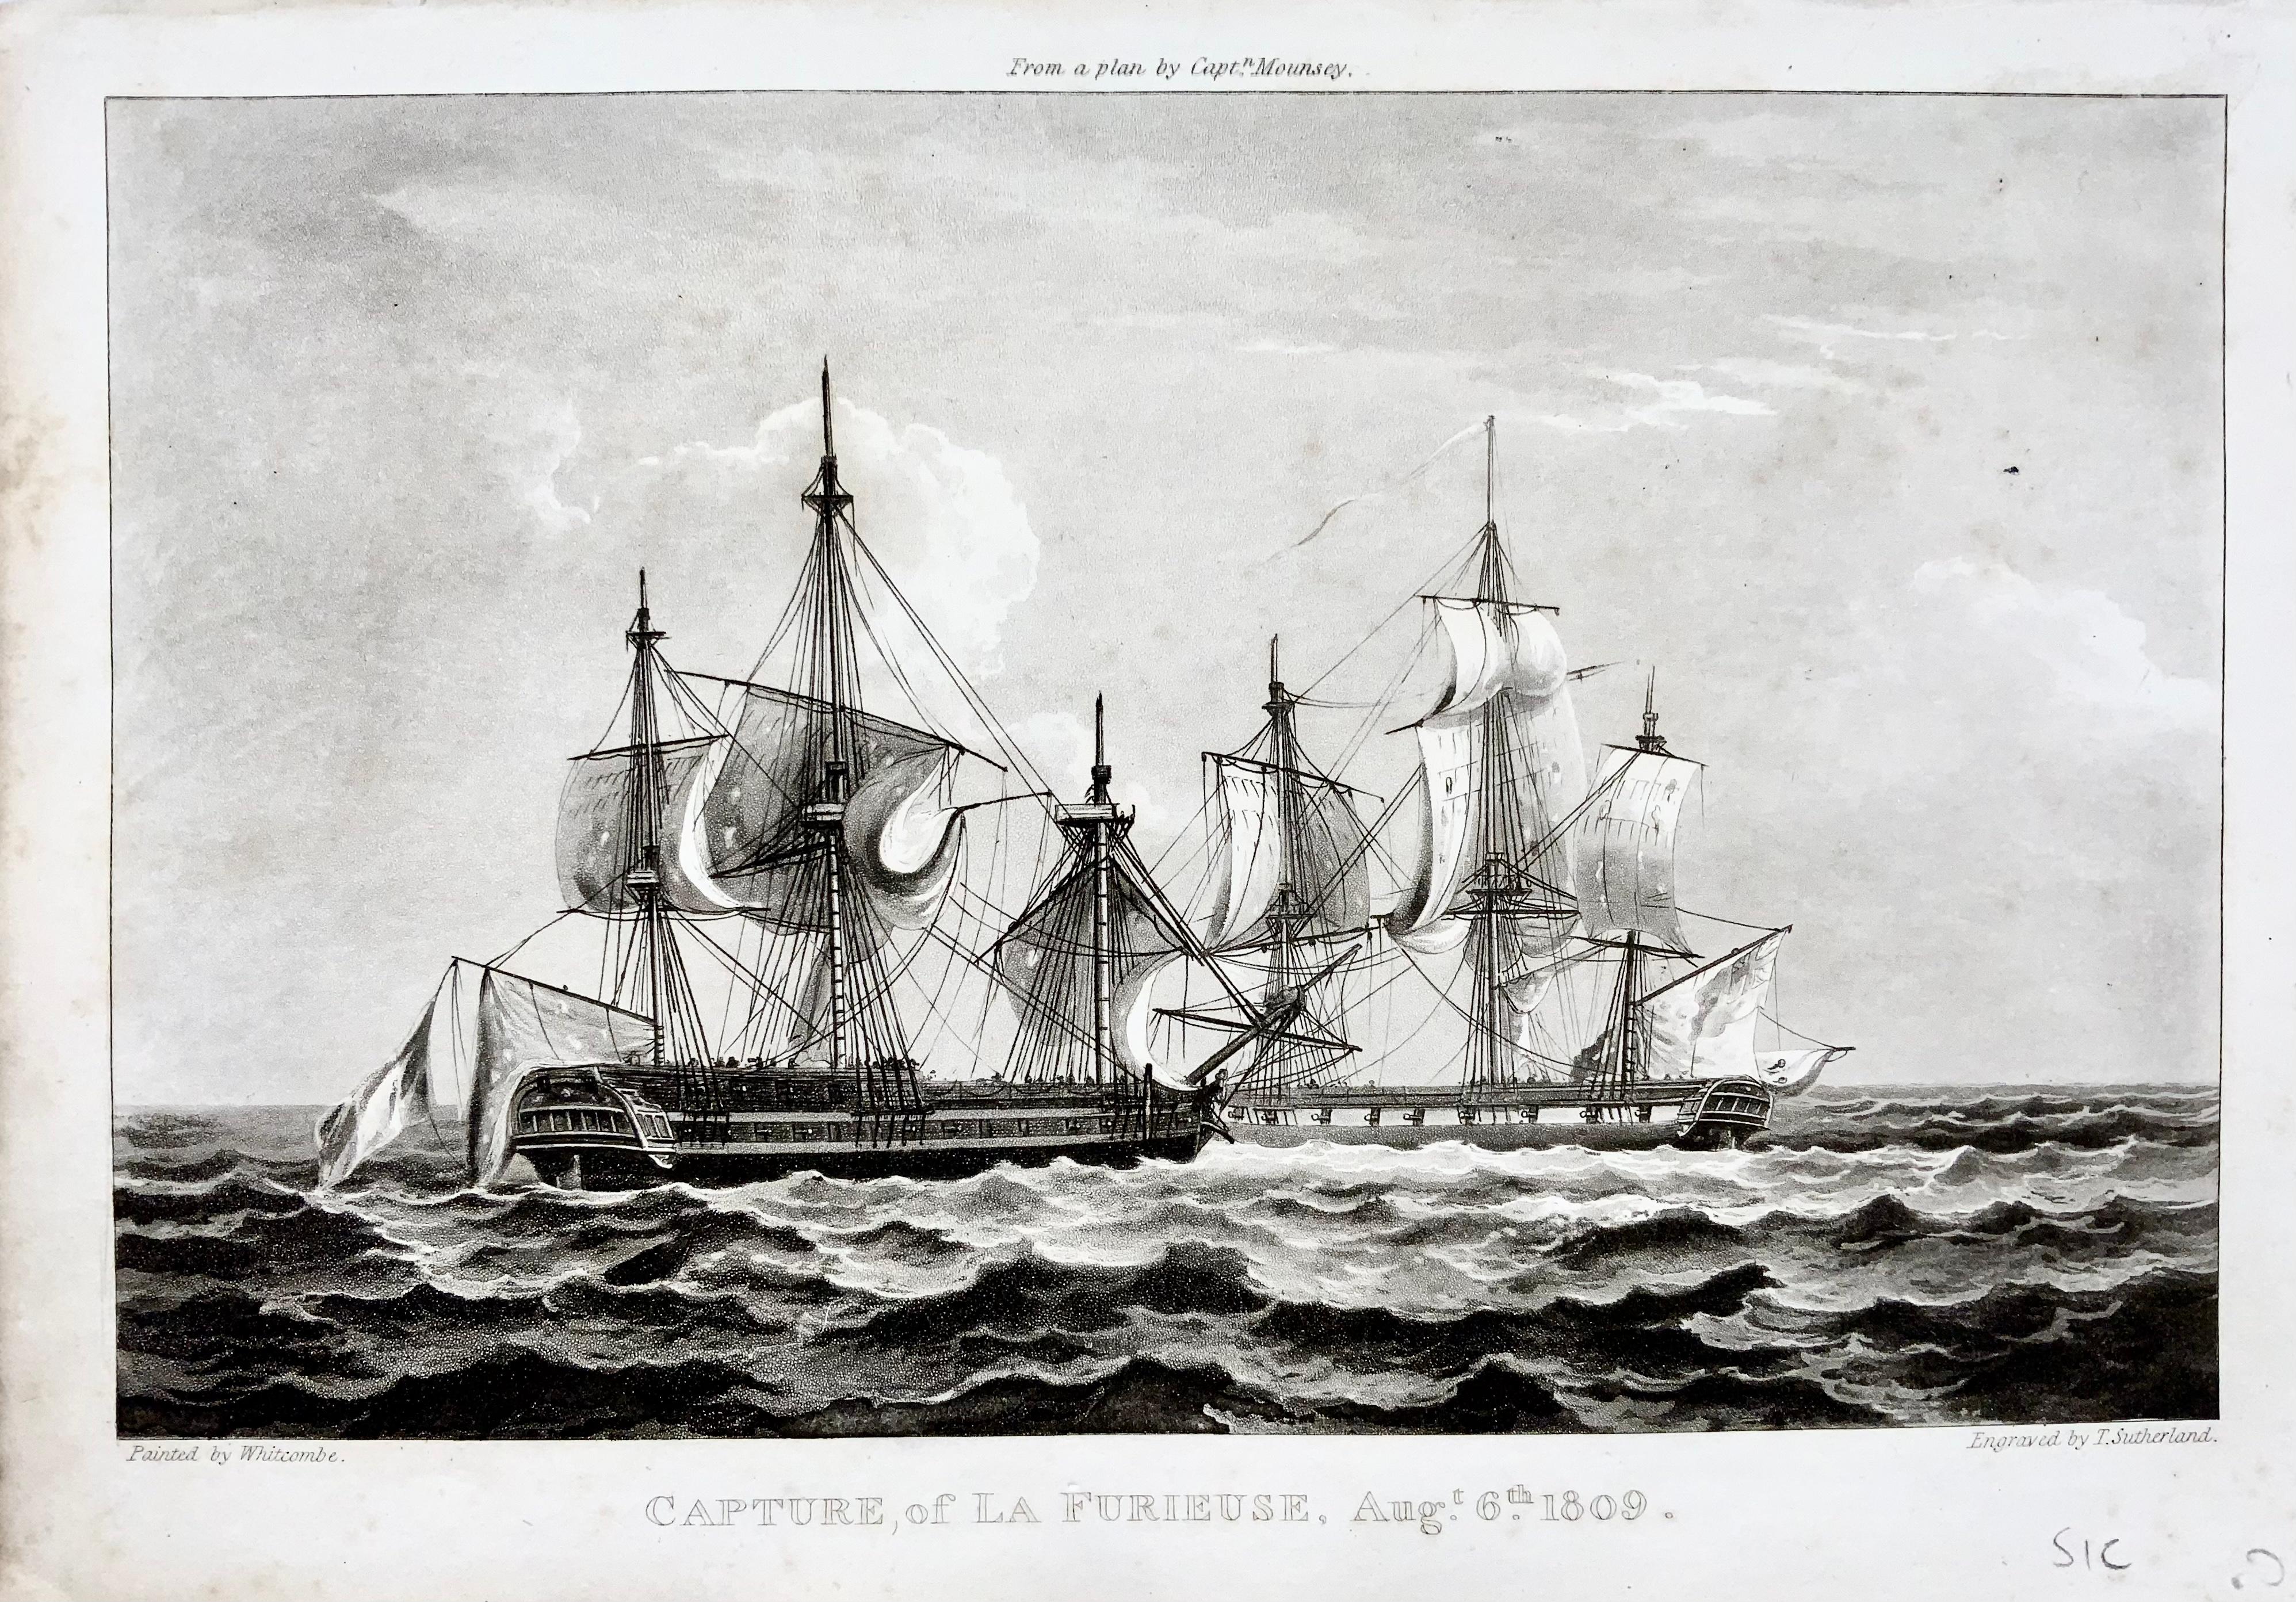 Whitcombe, Thomas, artist; Sutherland, Thomas, engraver

Capture of La Furieuse, August 6th. 1809

Grey toned aquatint.

Engraved by T. Sutherland for The Naval Chronology of Great Britain by J. Ralfe, published 1820.

Furieuse was a 38-gun frigate